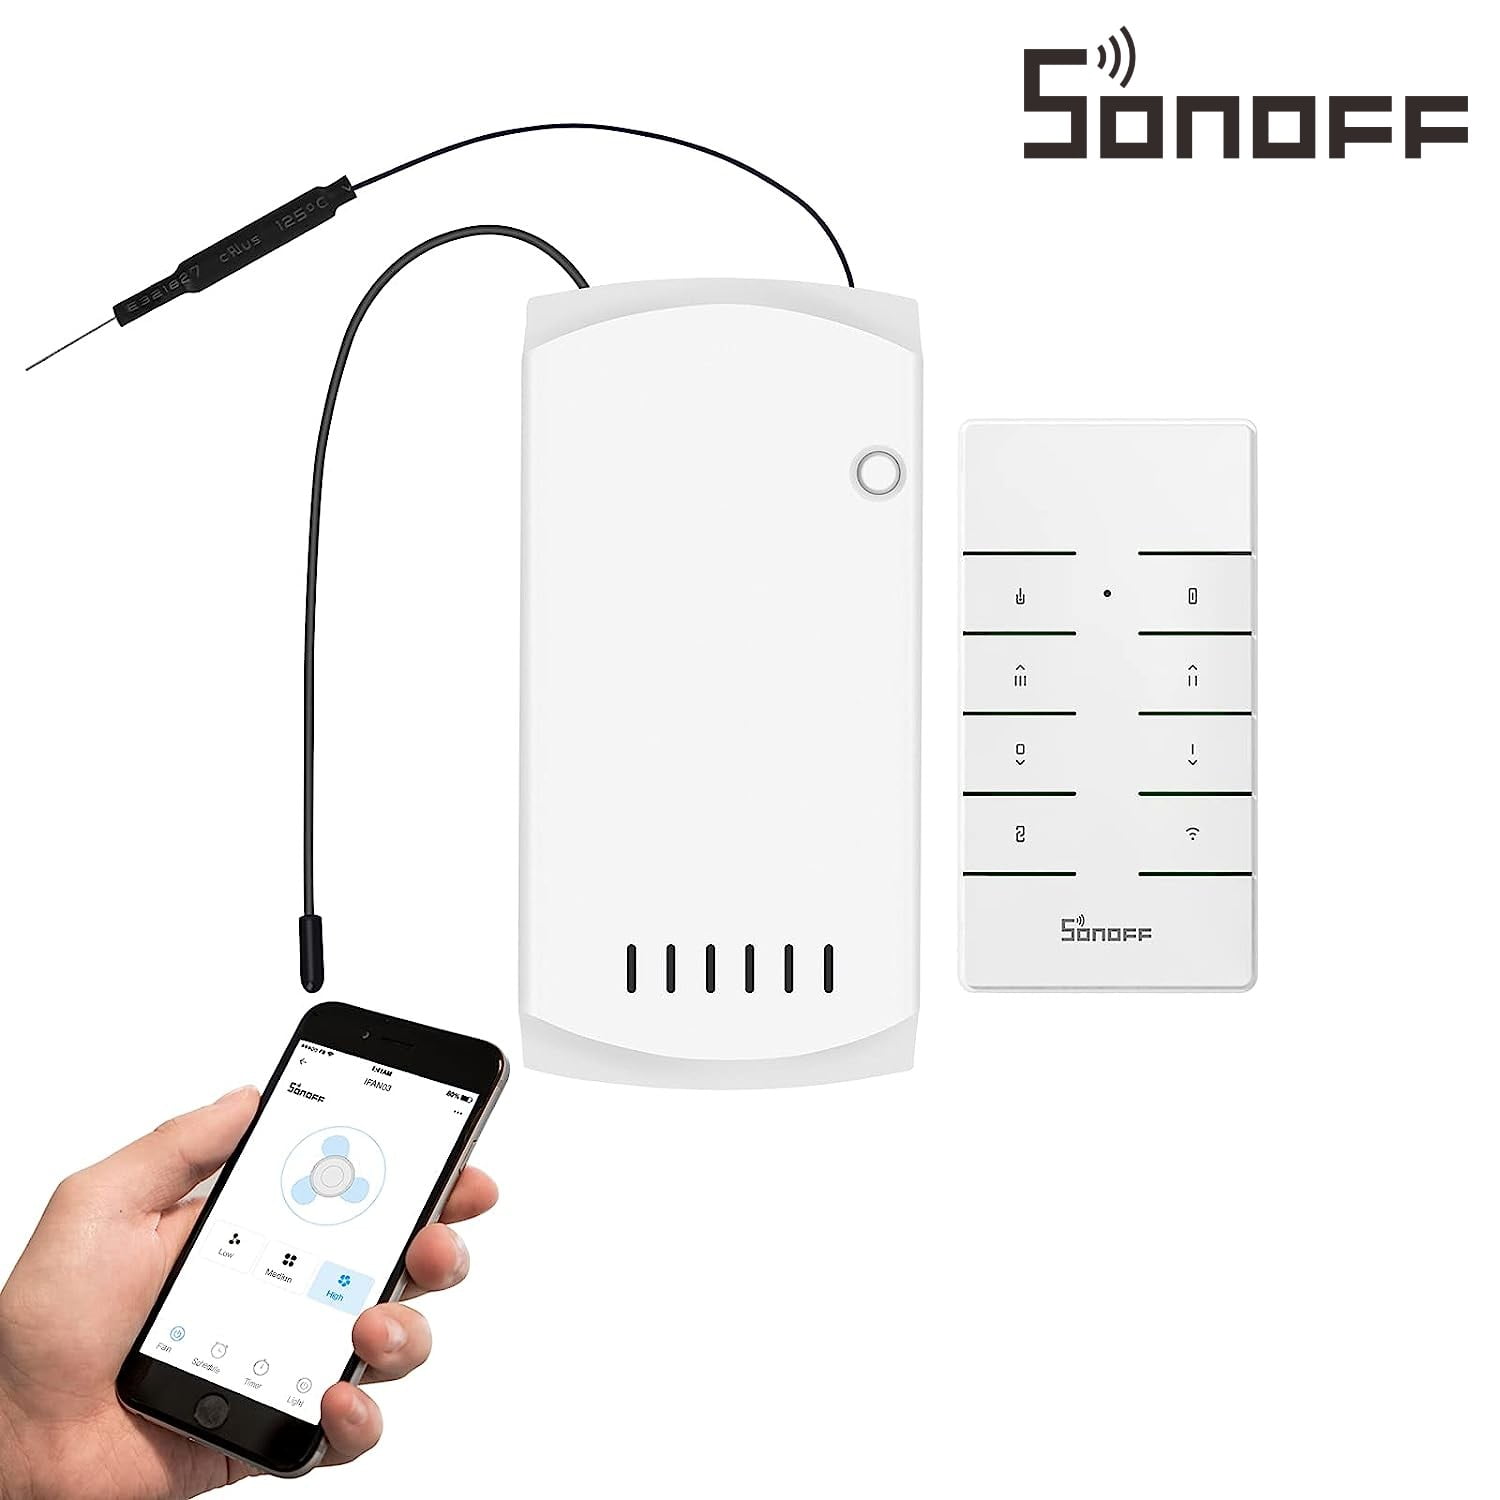 SONOFF iFan04-L WiFi Ceiling Fan Light Controller, APP Control& Remote Control, Compatible with Alexa & Google Home Assistant (Remote control not included) - image 1 of 11